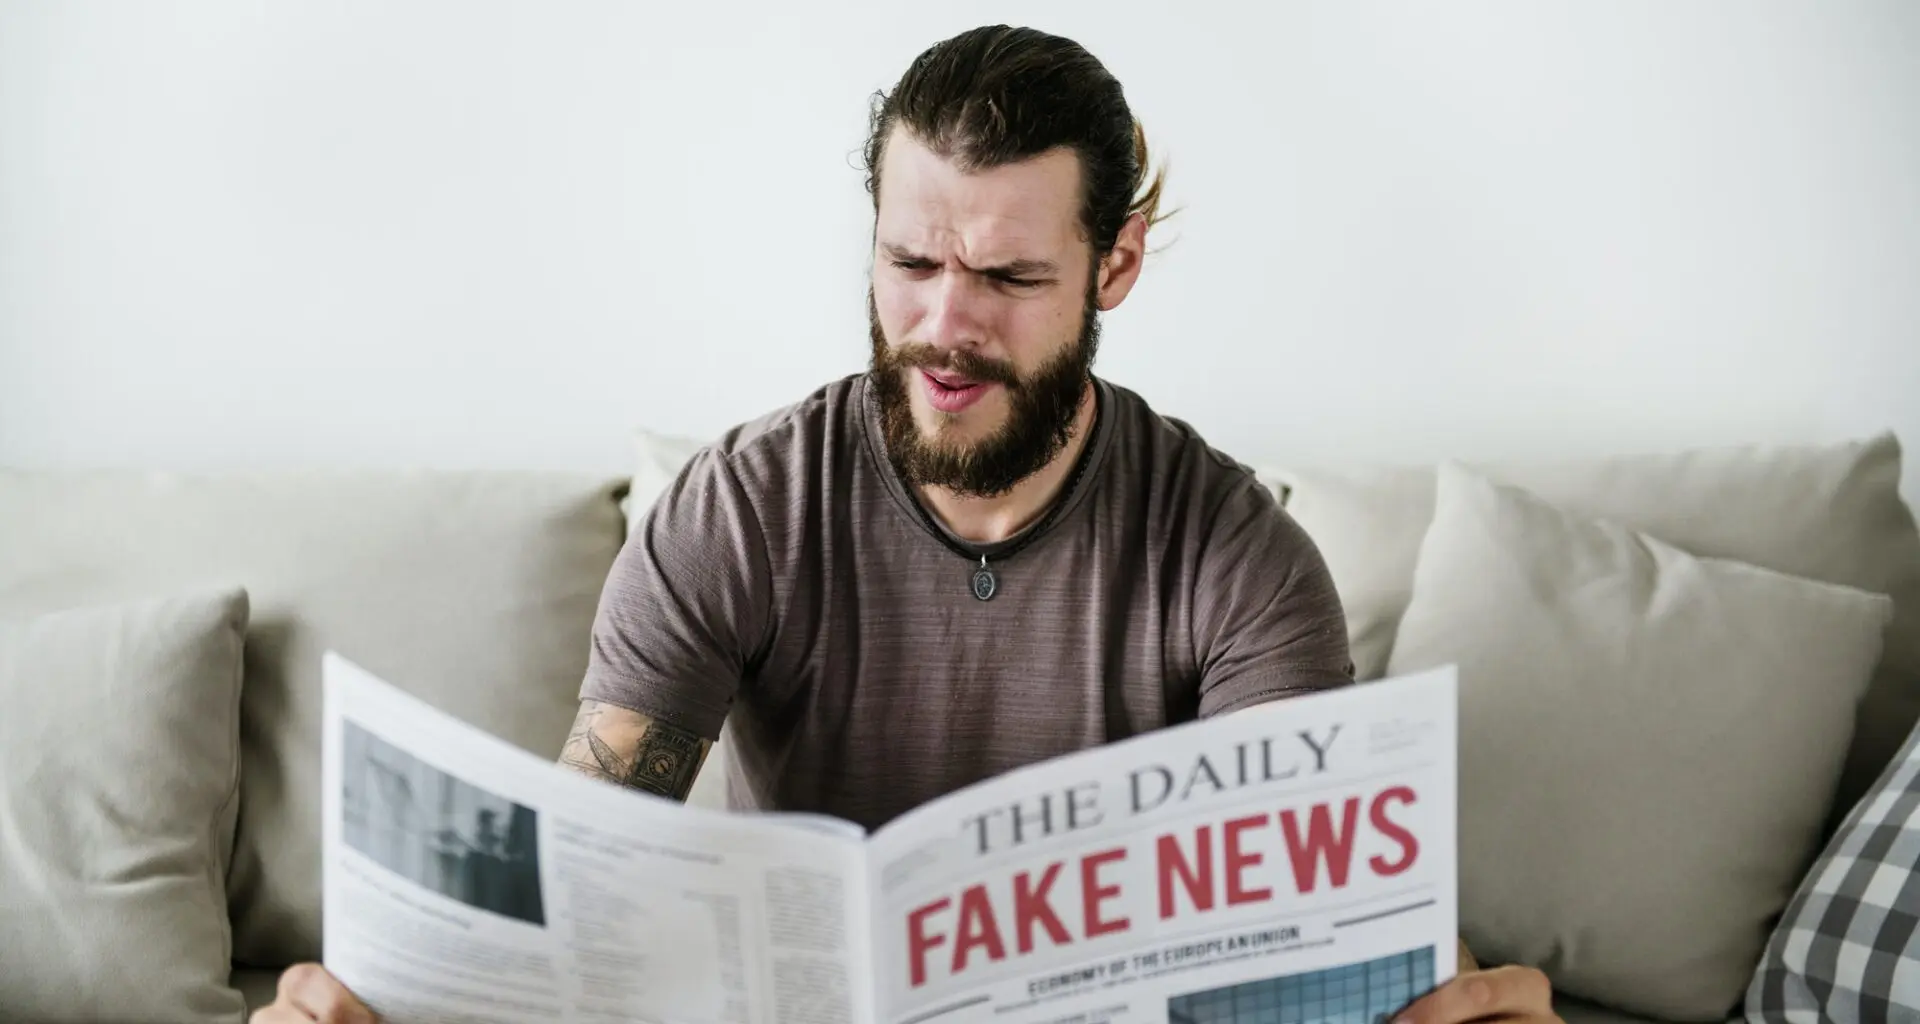 A man with a beard, sitting on a couch, appears perplexed or frustrated while reading a newspaper with the headline "FAKE NEWS."